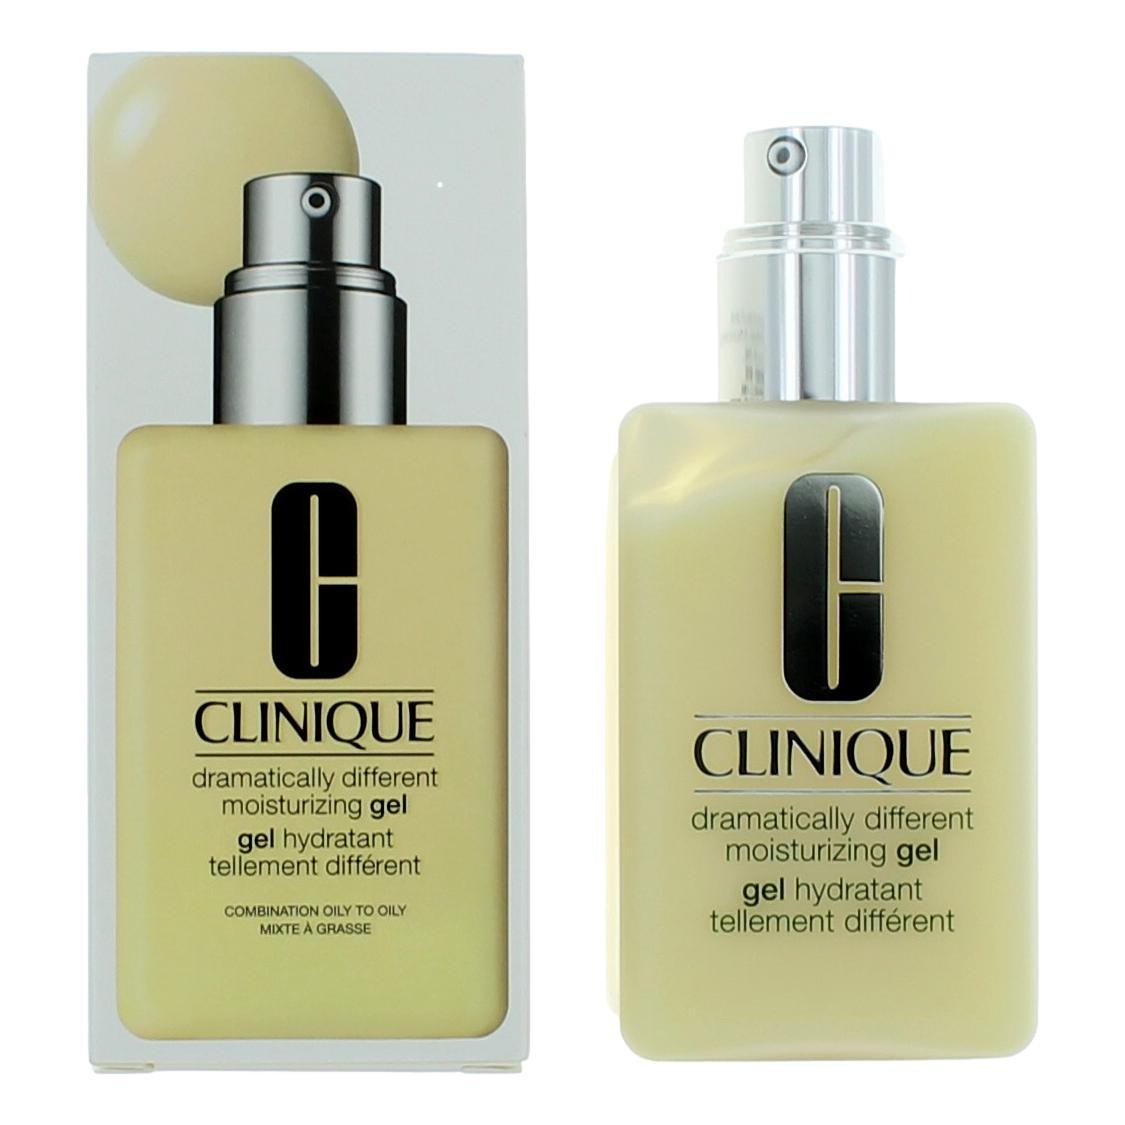 Clinique Dramatically Different by Clinique 6.7 oz Moisturizing Gel with Pump